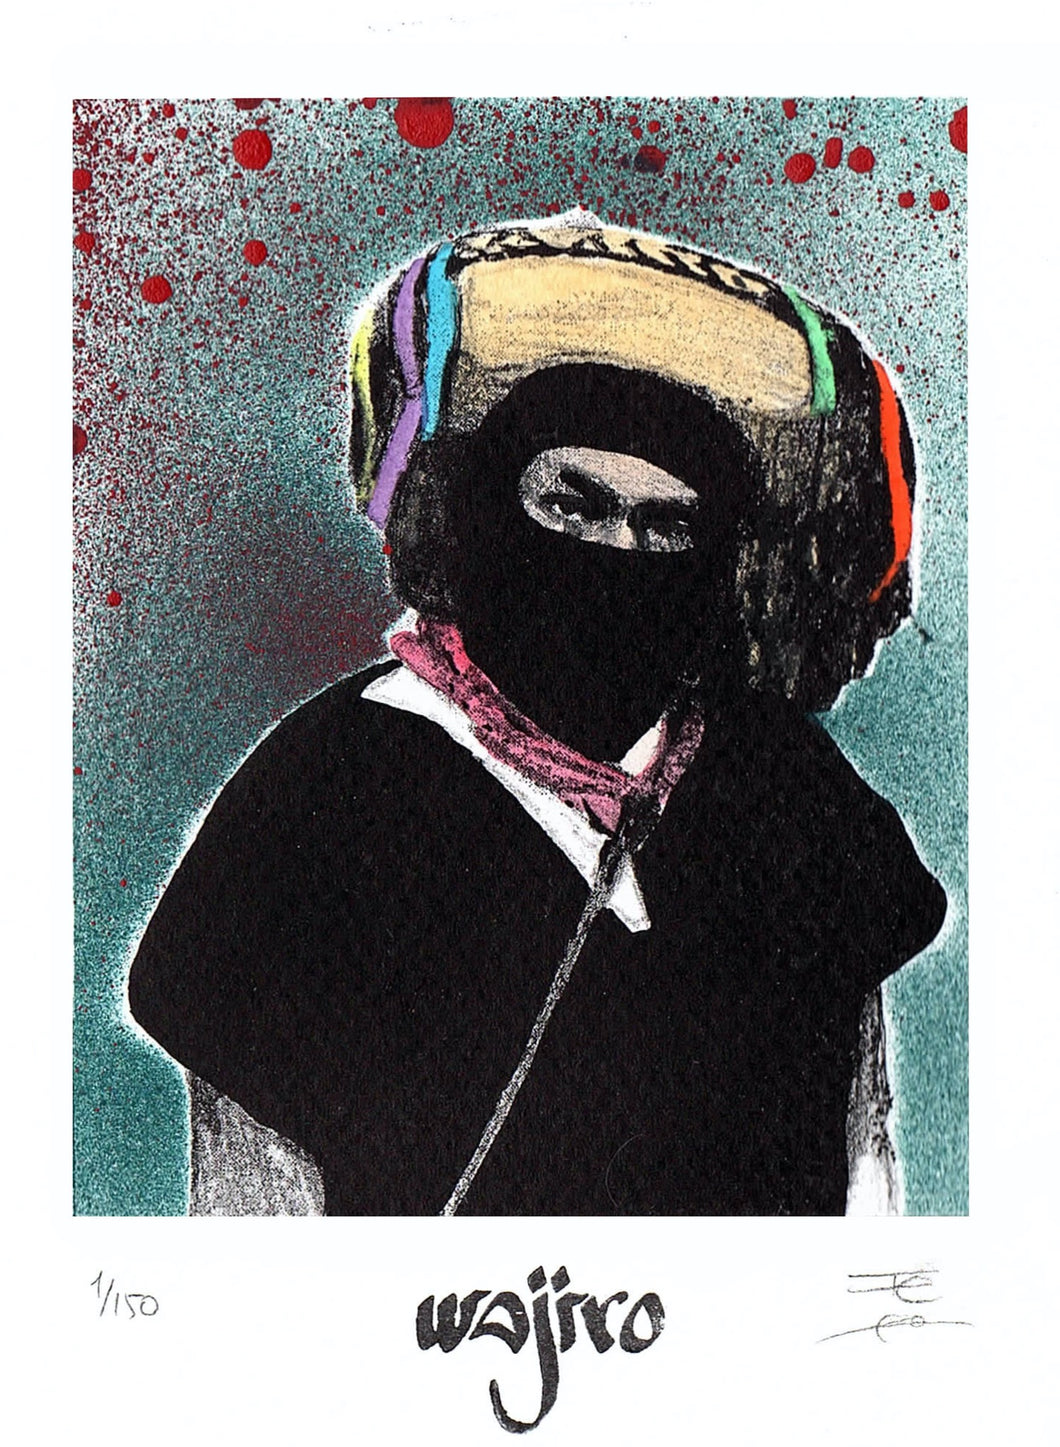 Chiapaneco EZLN Siligraphy Engraving - Watercolour and Spray by Wajiro Dream - 17.5x12.5 cms. - 2017 Limited Edition